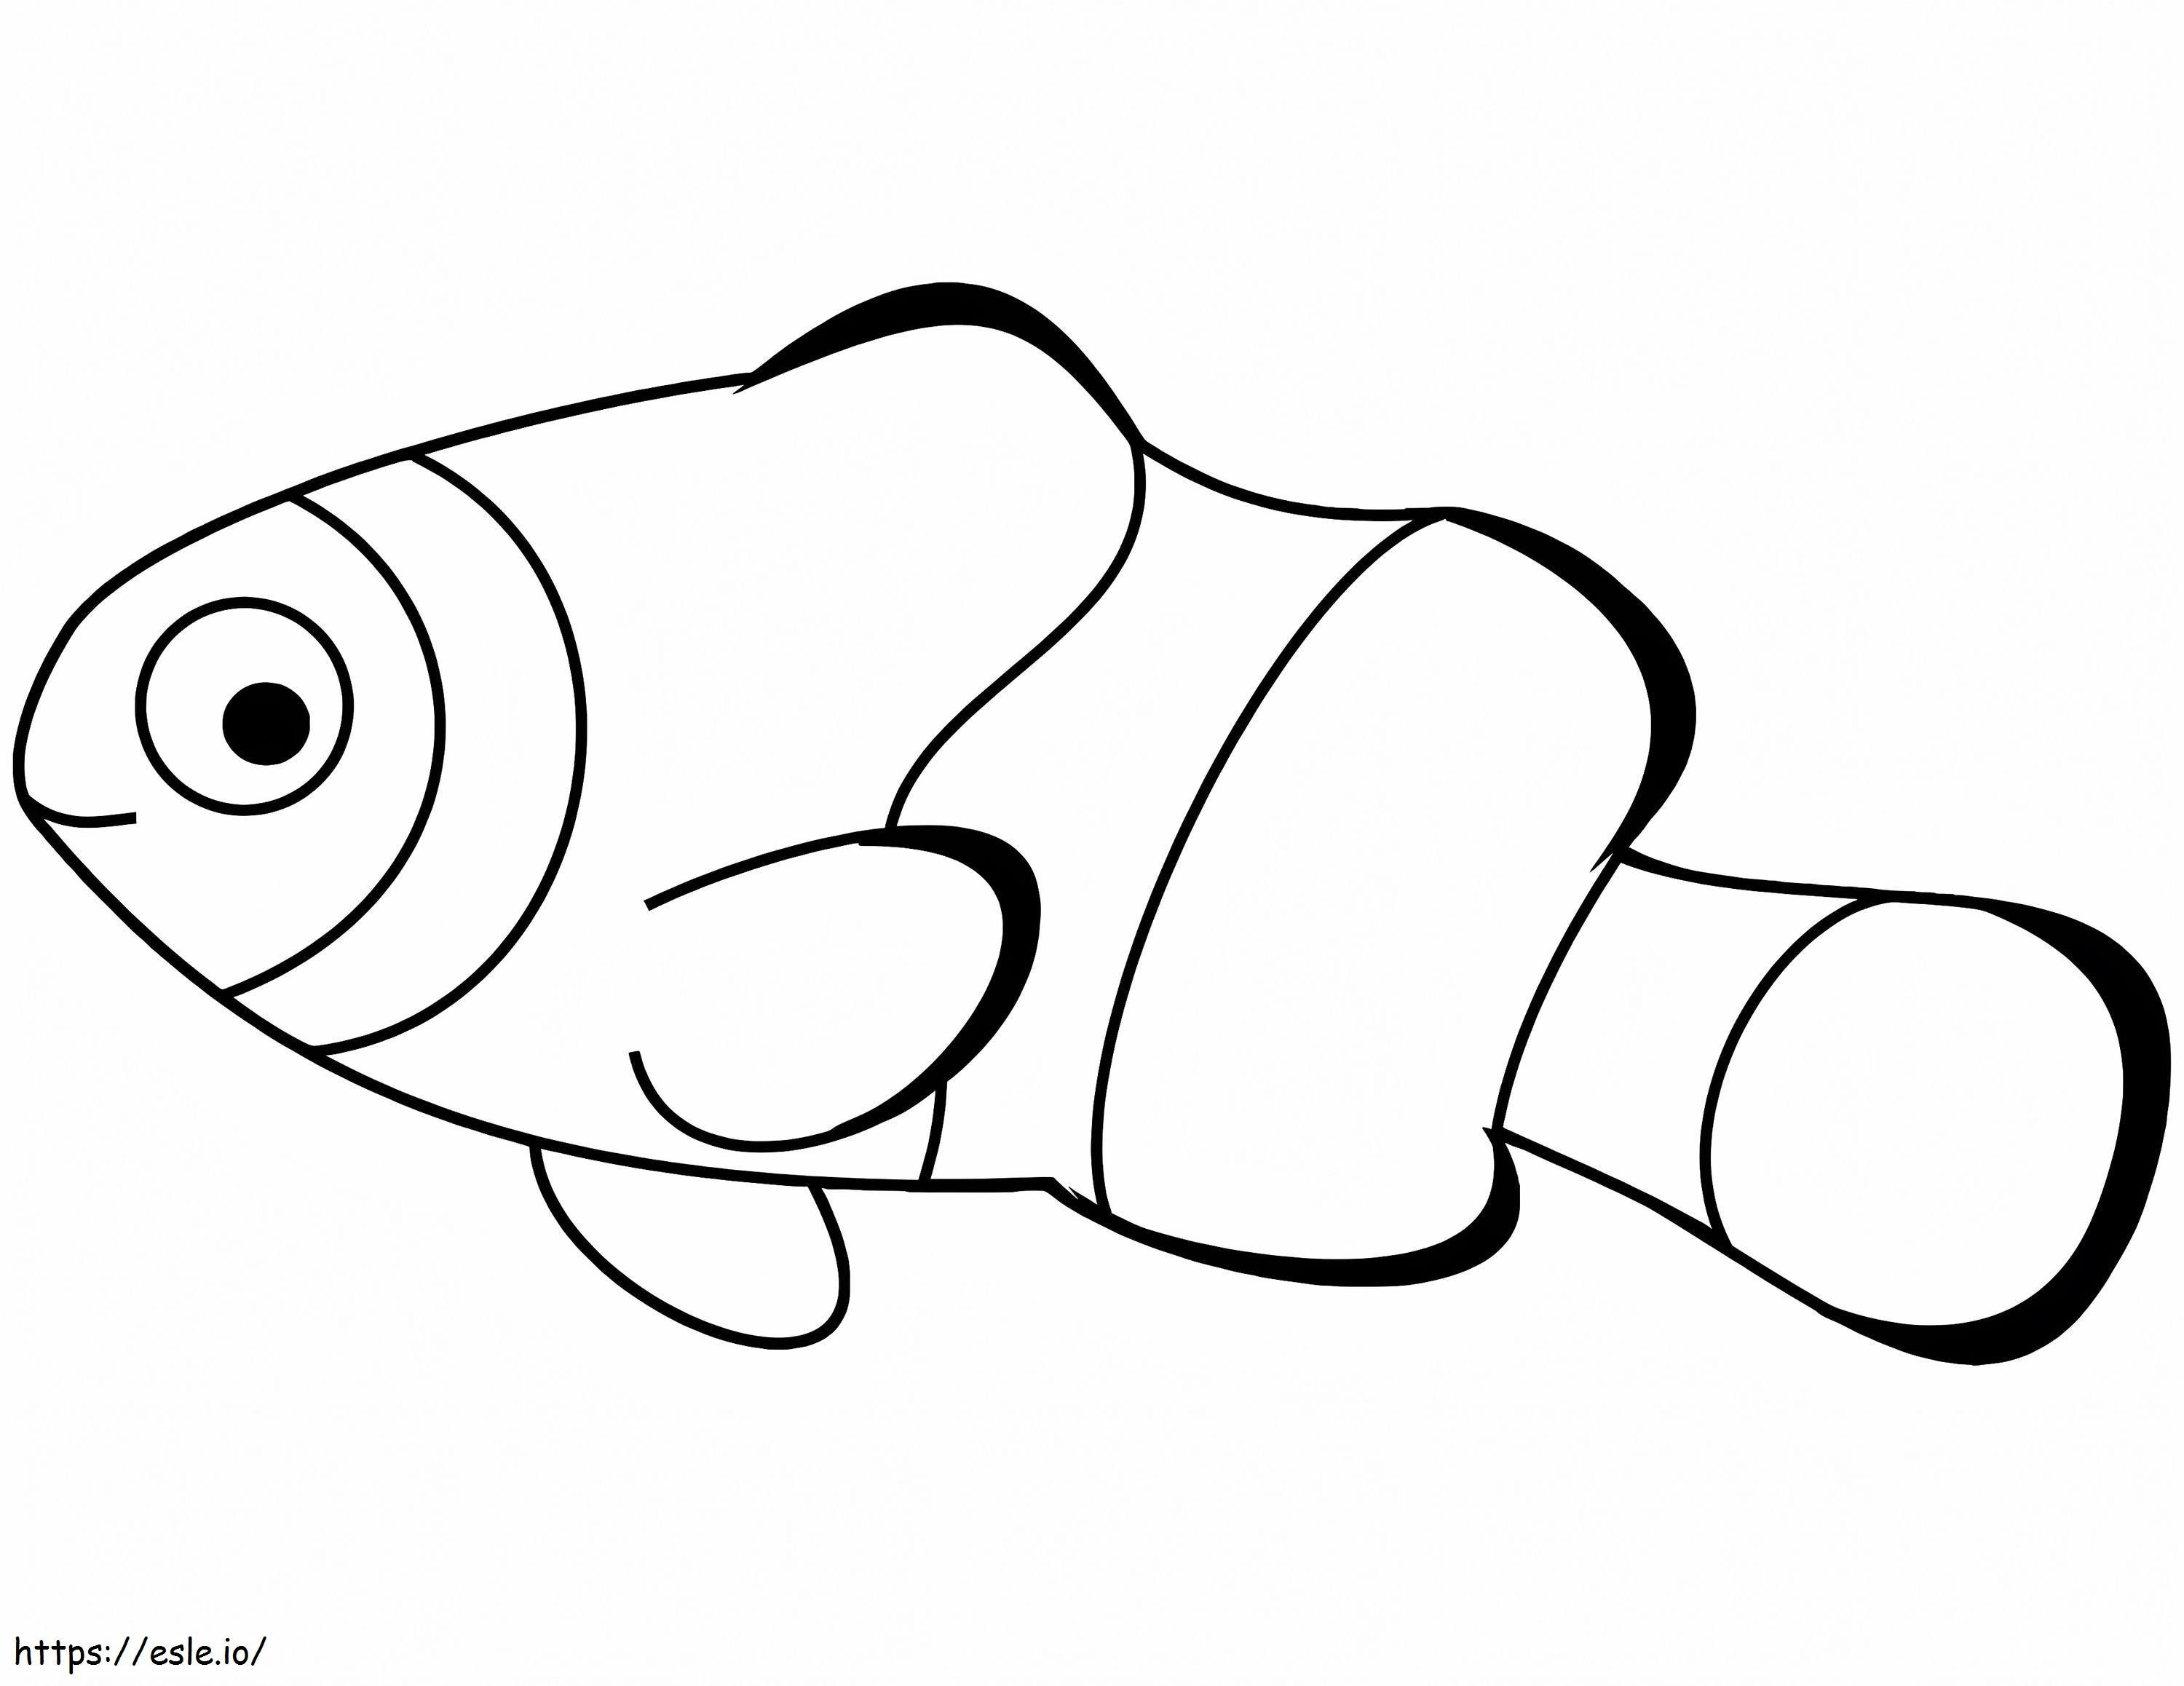 Anemone Fish coloring page